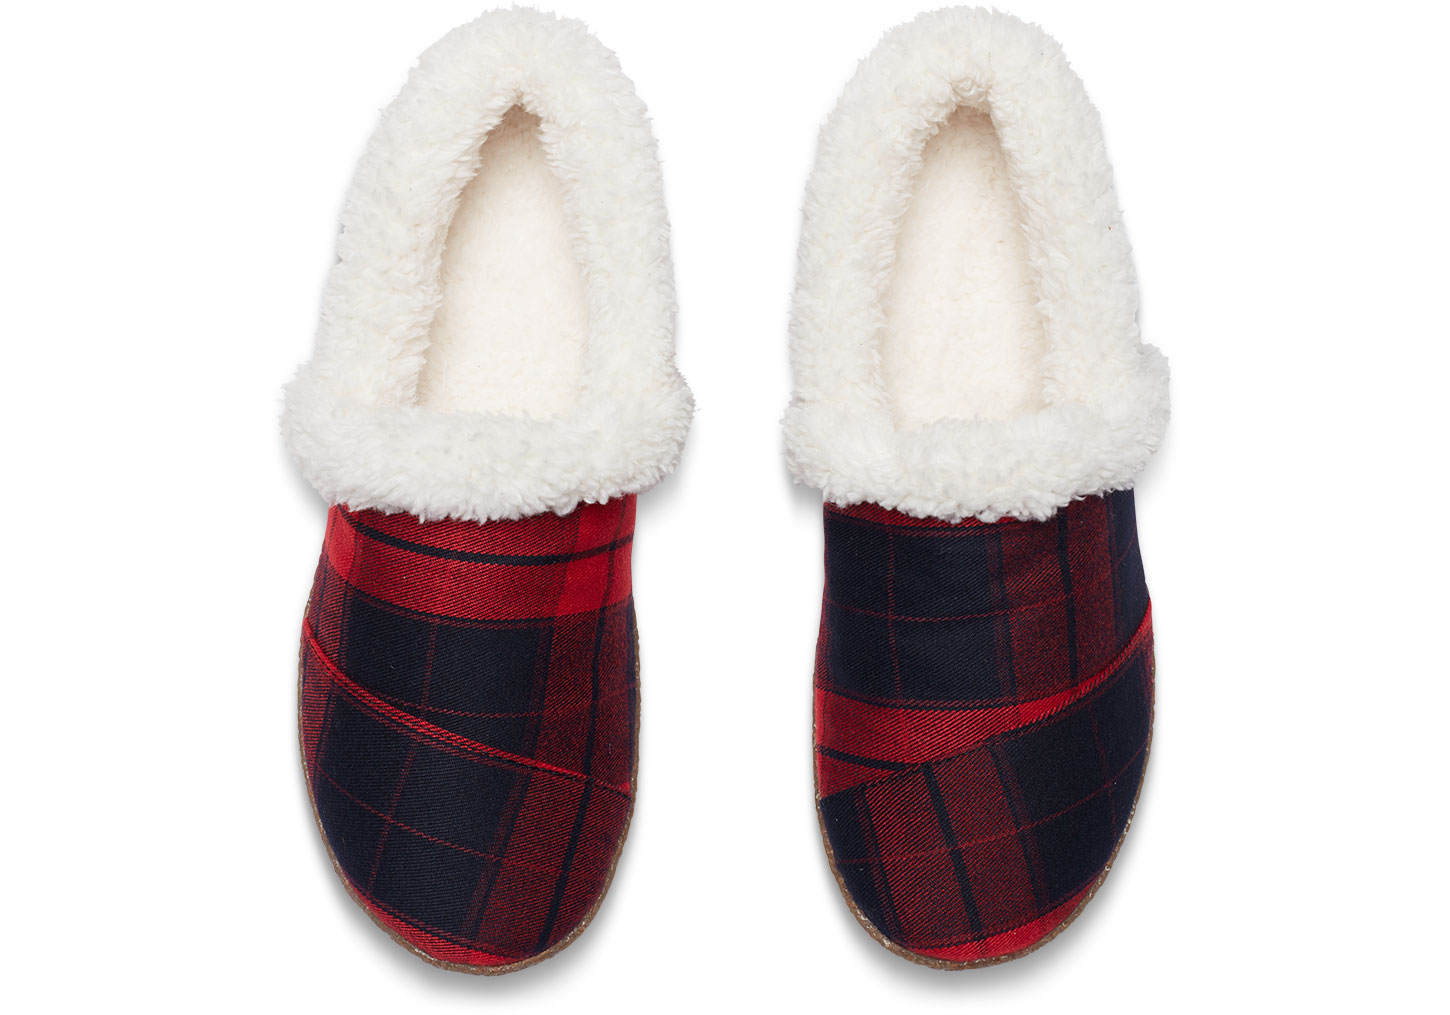 plaid house slippers